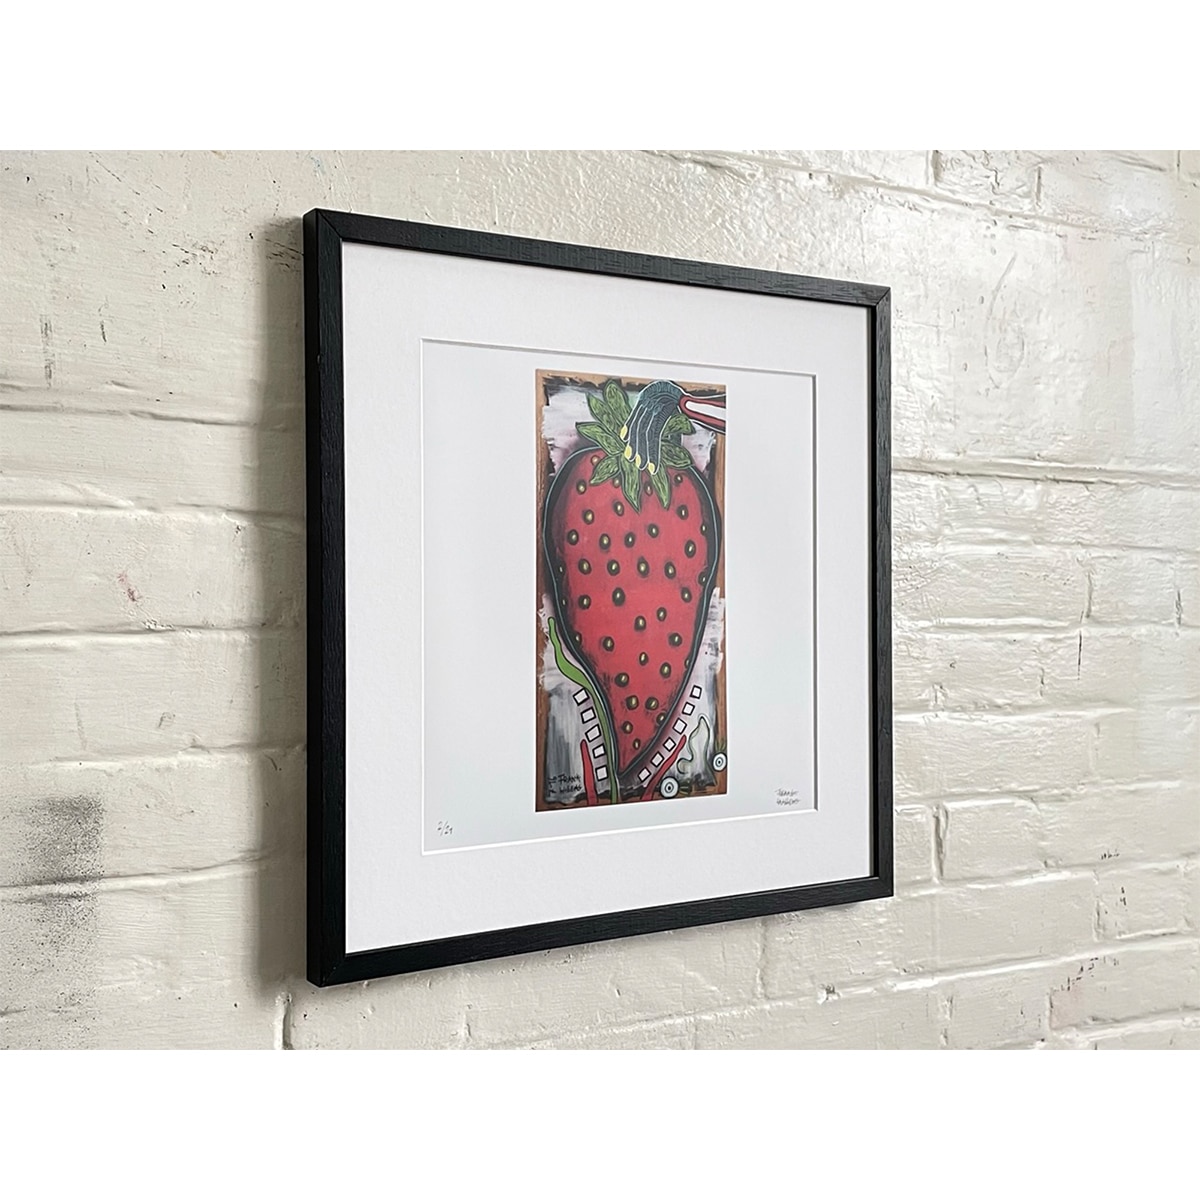 Limited Edt Art Prints -_0000__0000_YUMMY STRAWBERRY 01 - Frank Willems